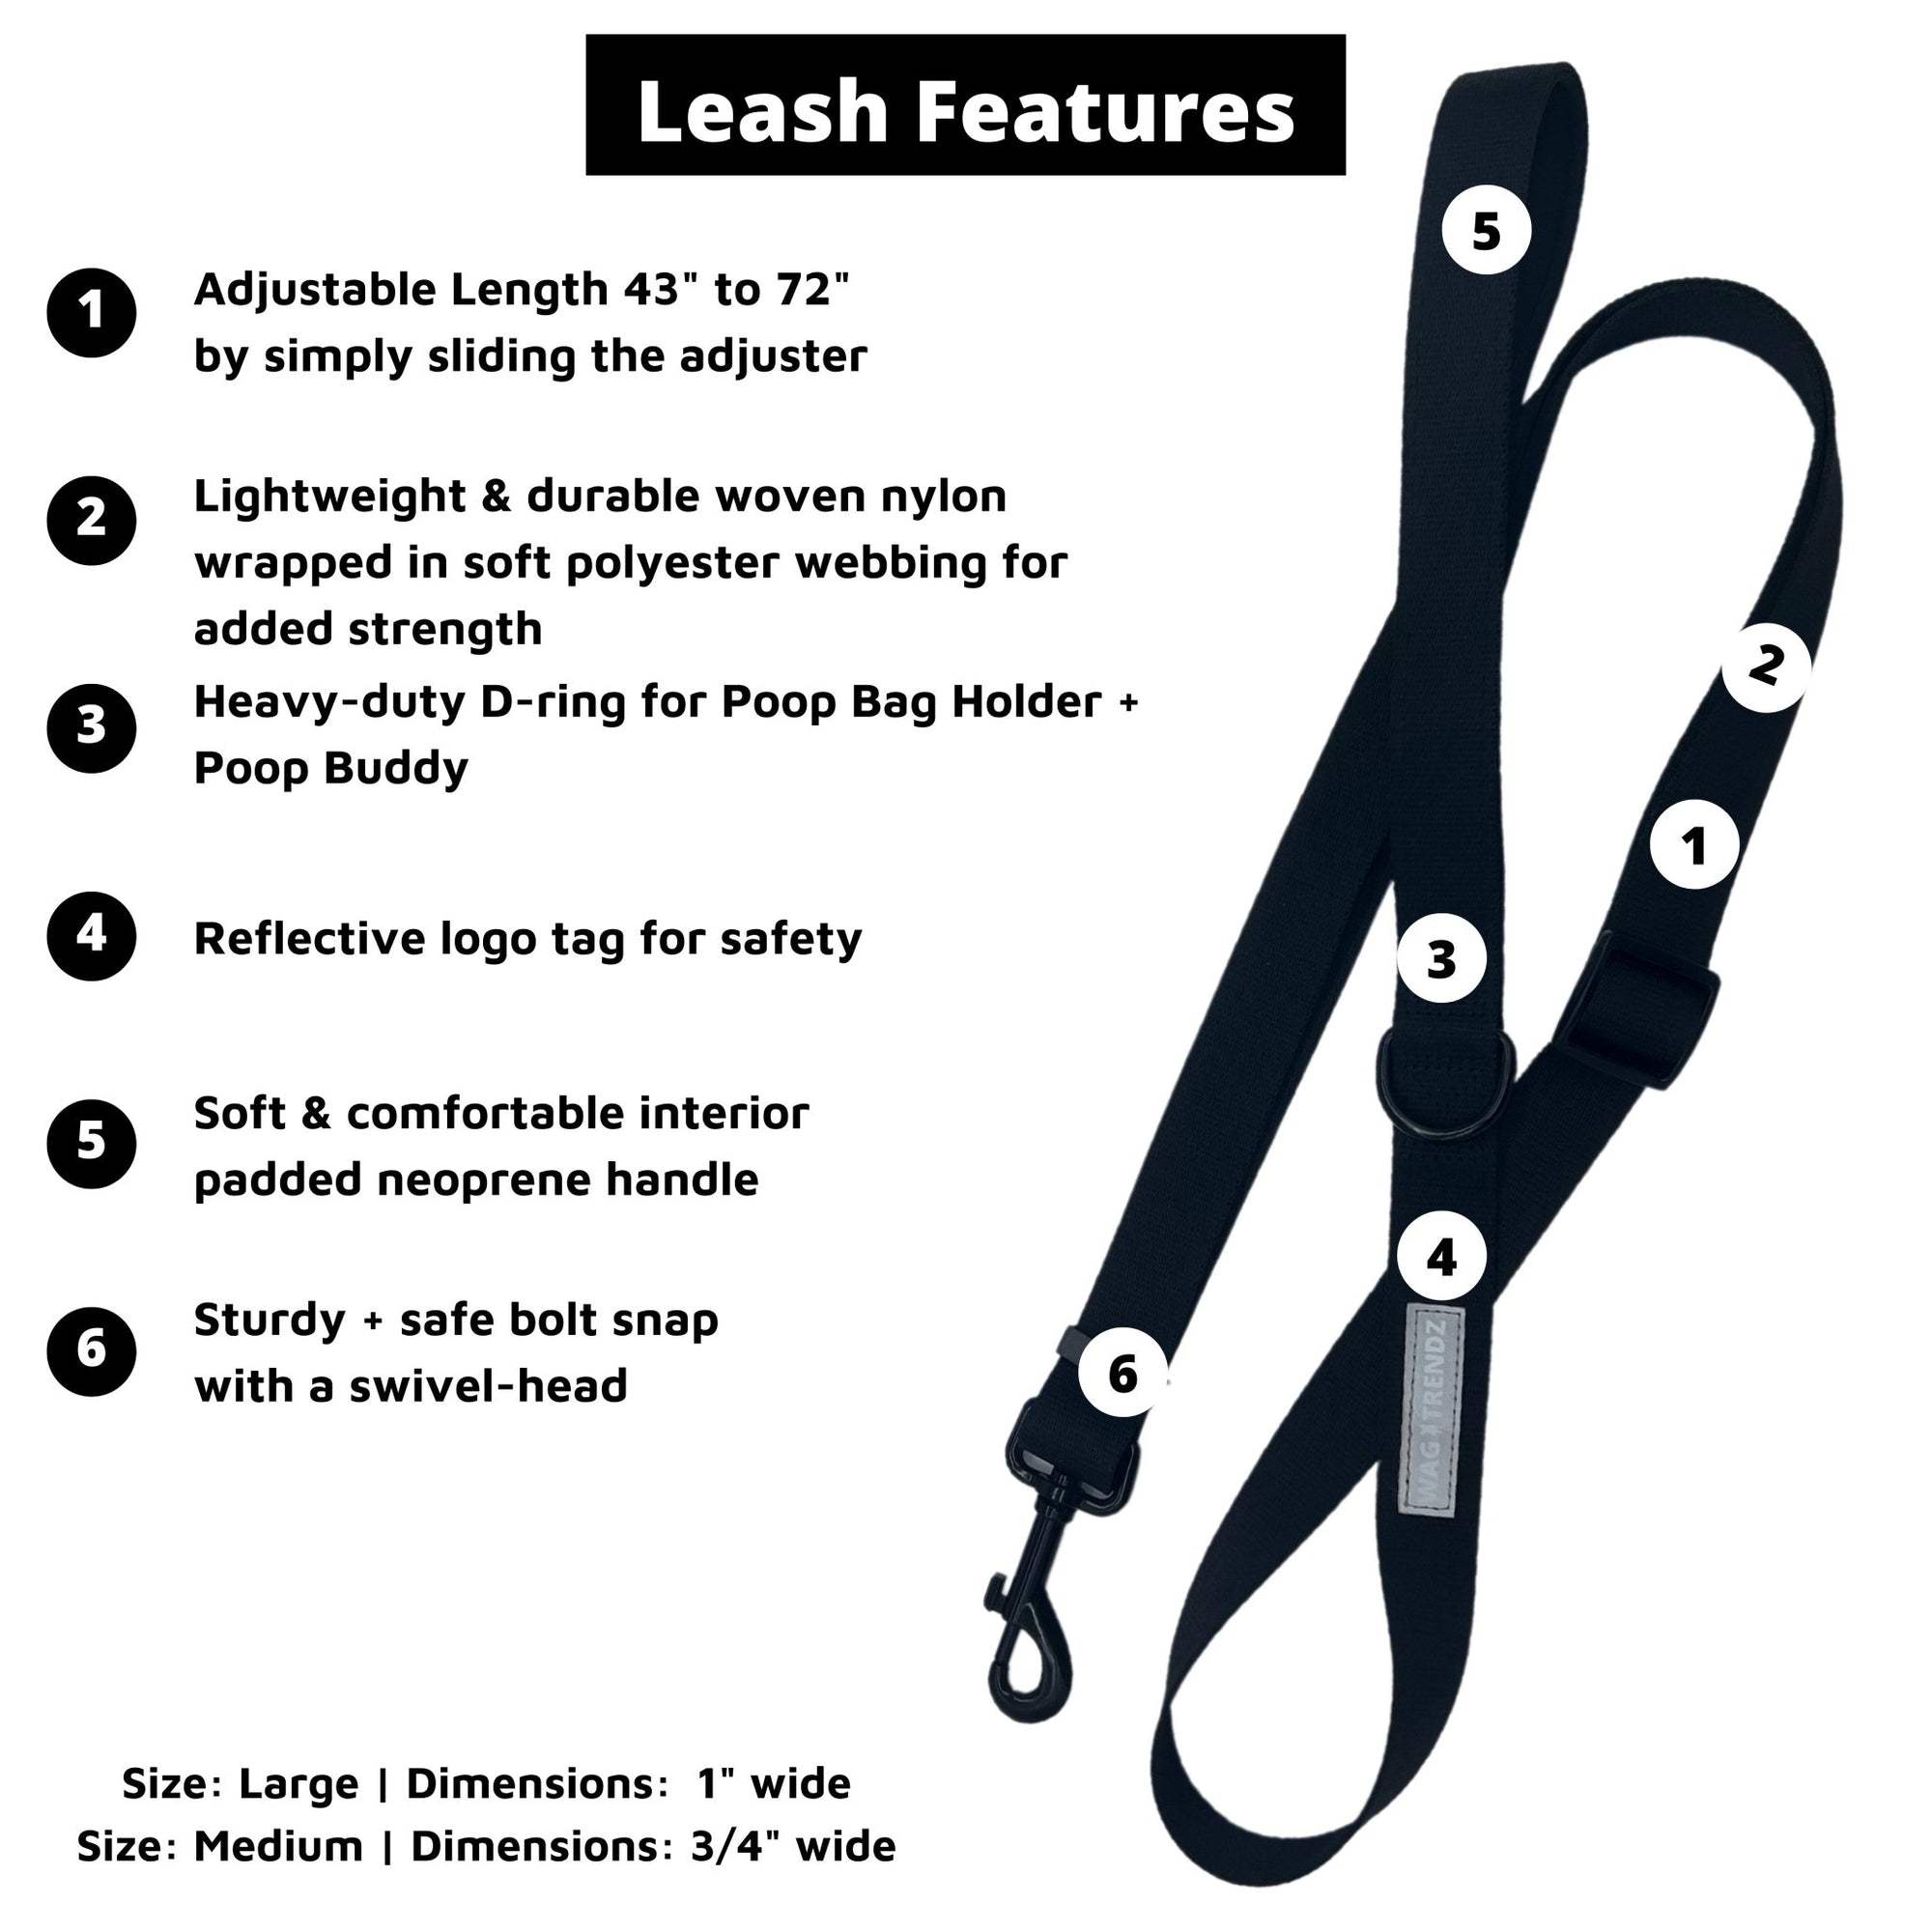 Dog Harness and Leash Set - black adjustable dog leash with product feature captions - against solid white background - Wag Trendz